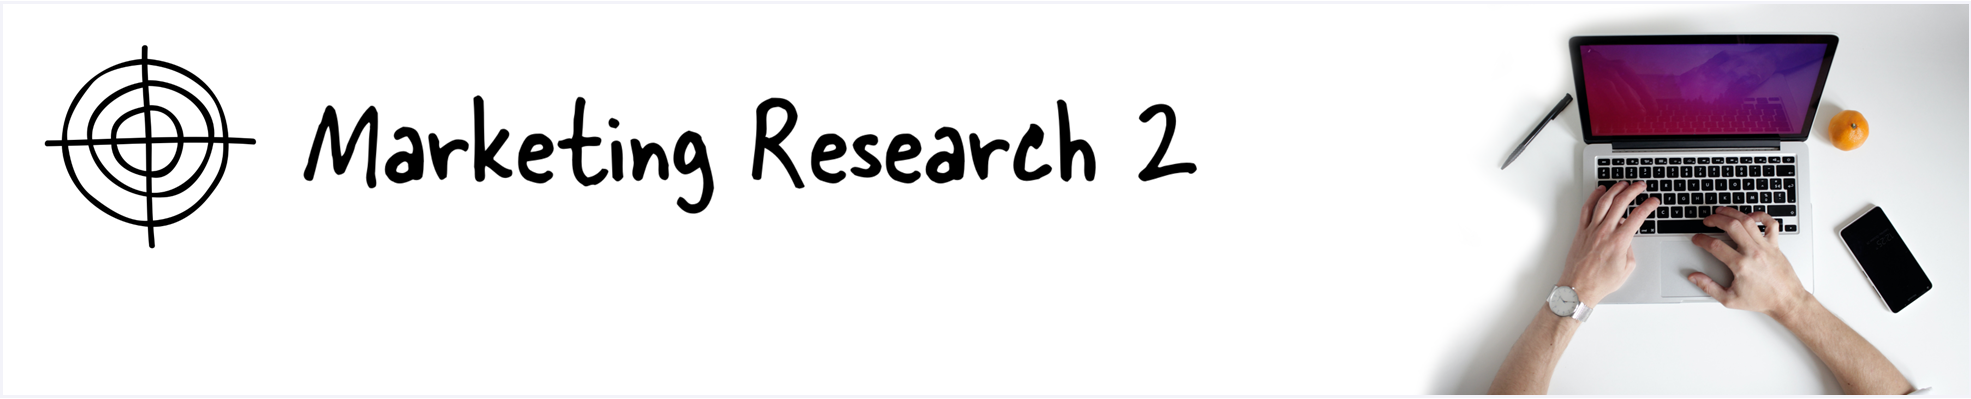 Marketing Research 2